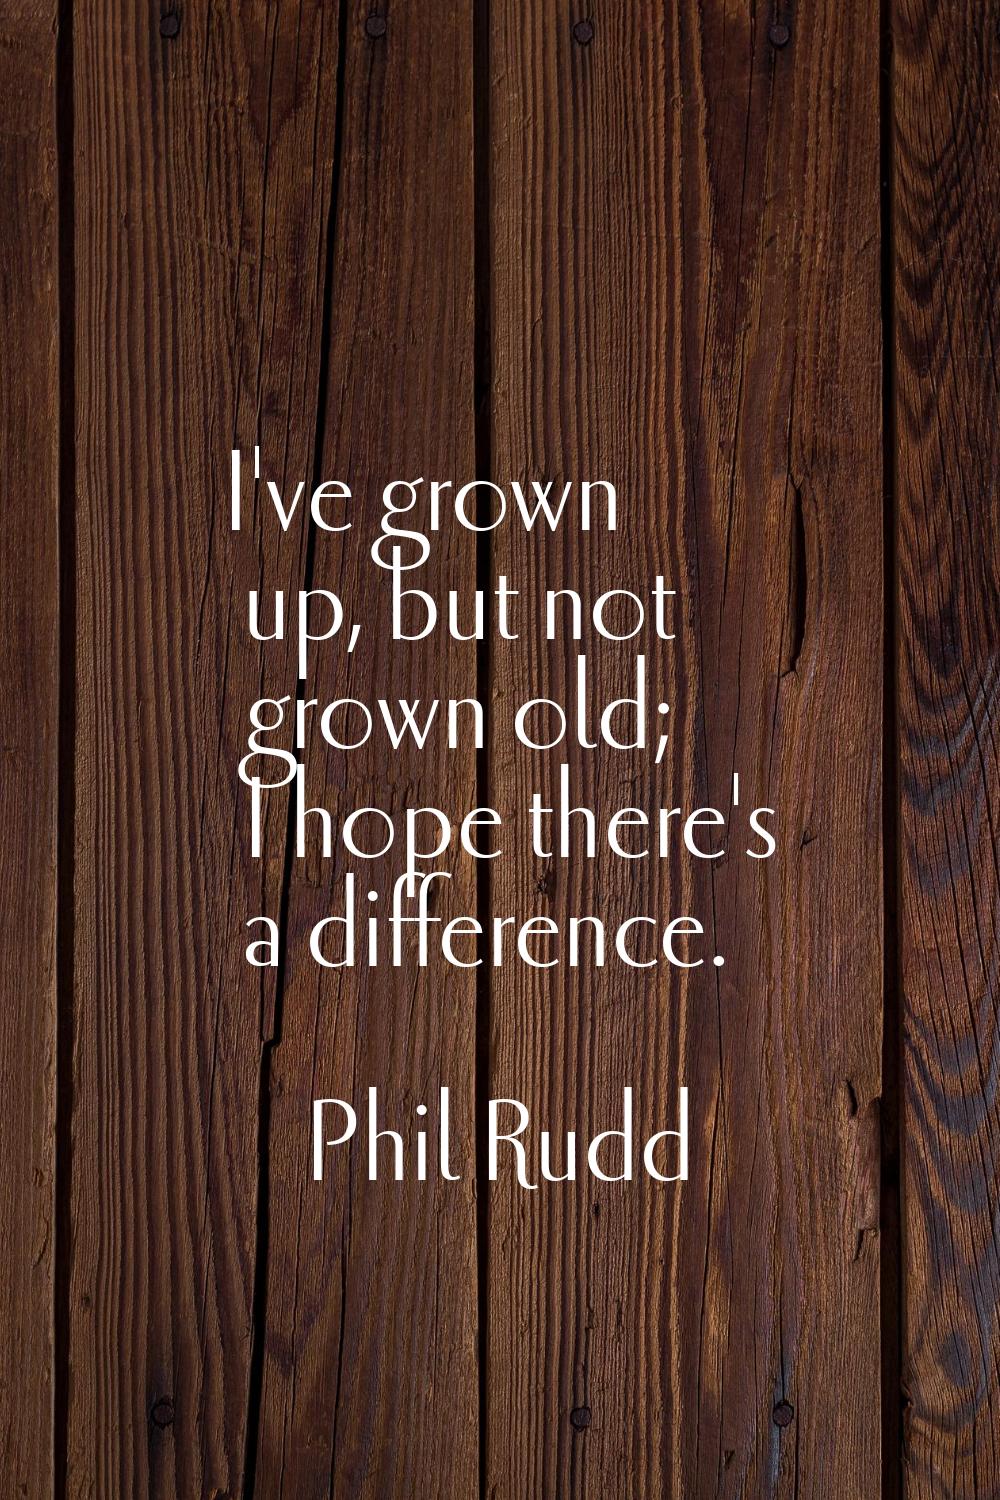 I've grown up, but not grown old; I hope there's a difference.